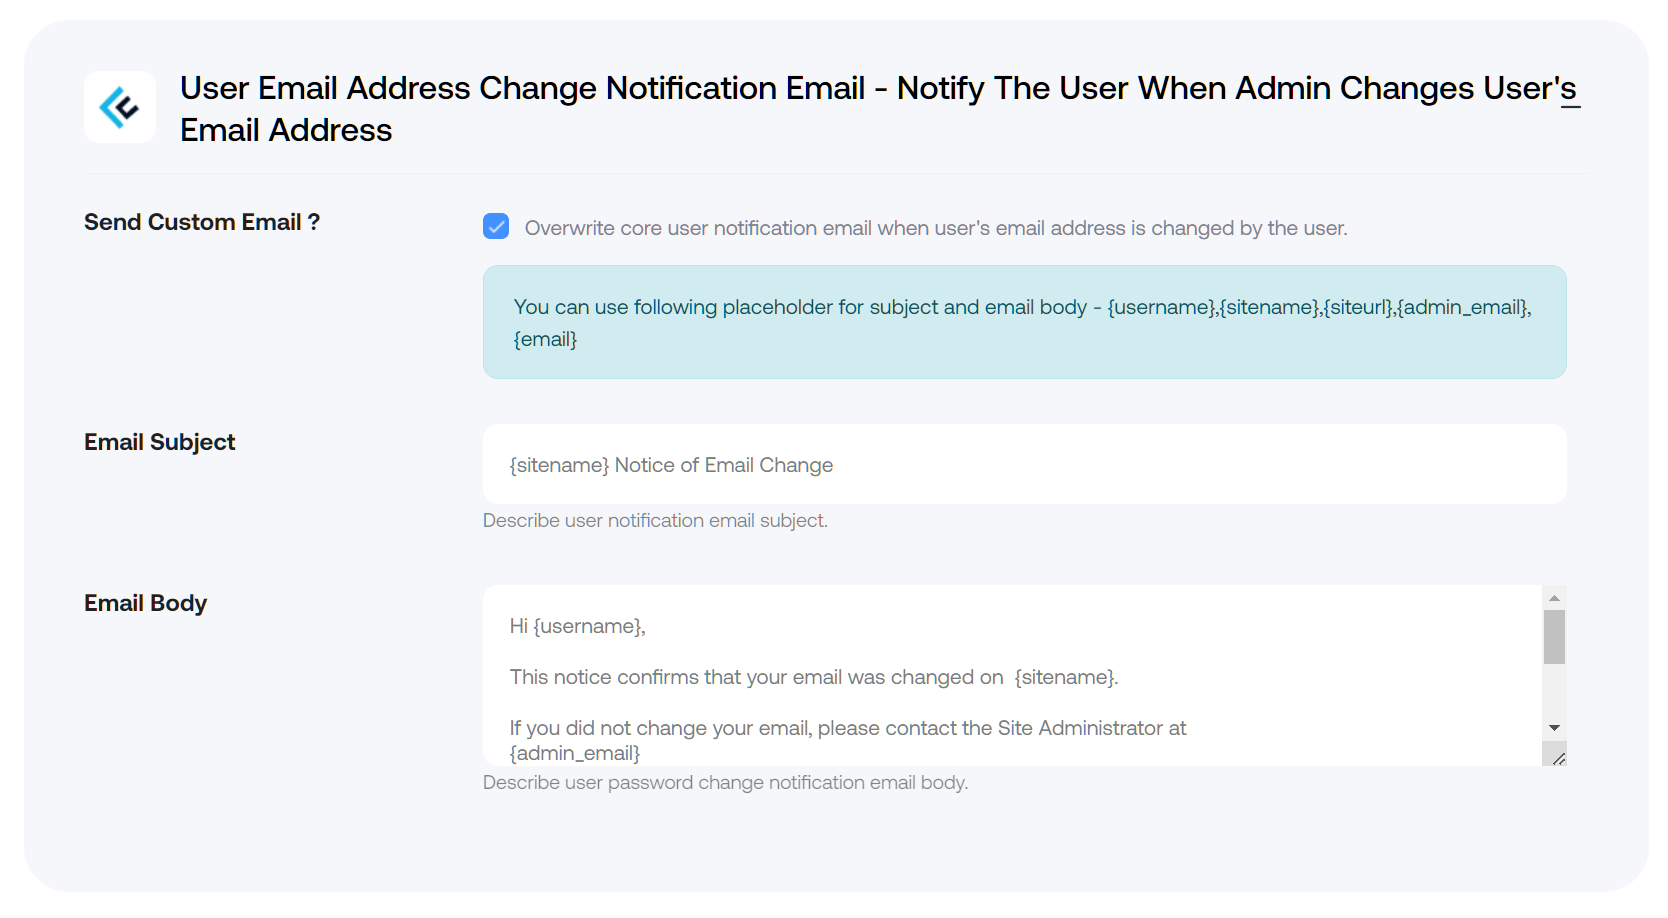 User Email Address Change Notification Email